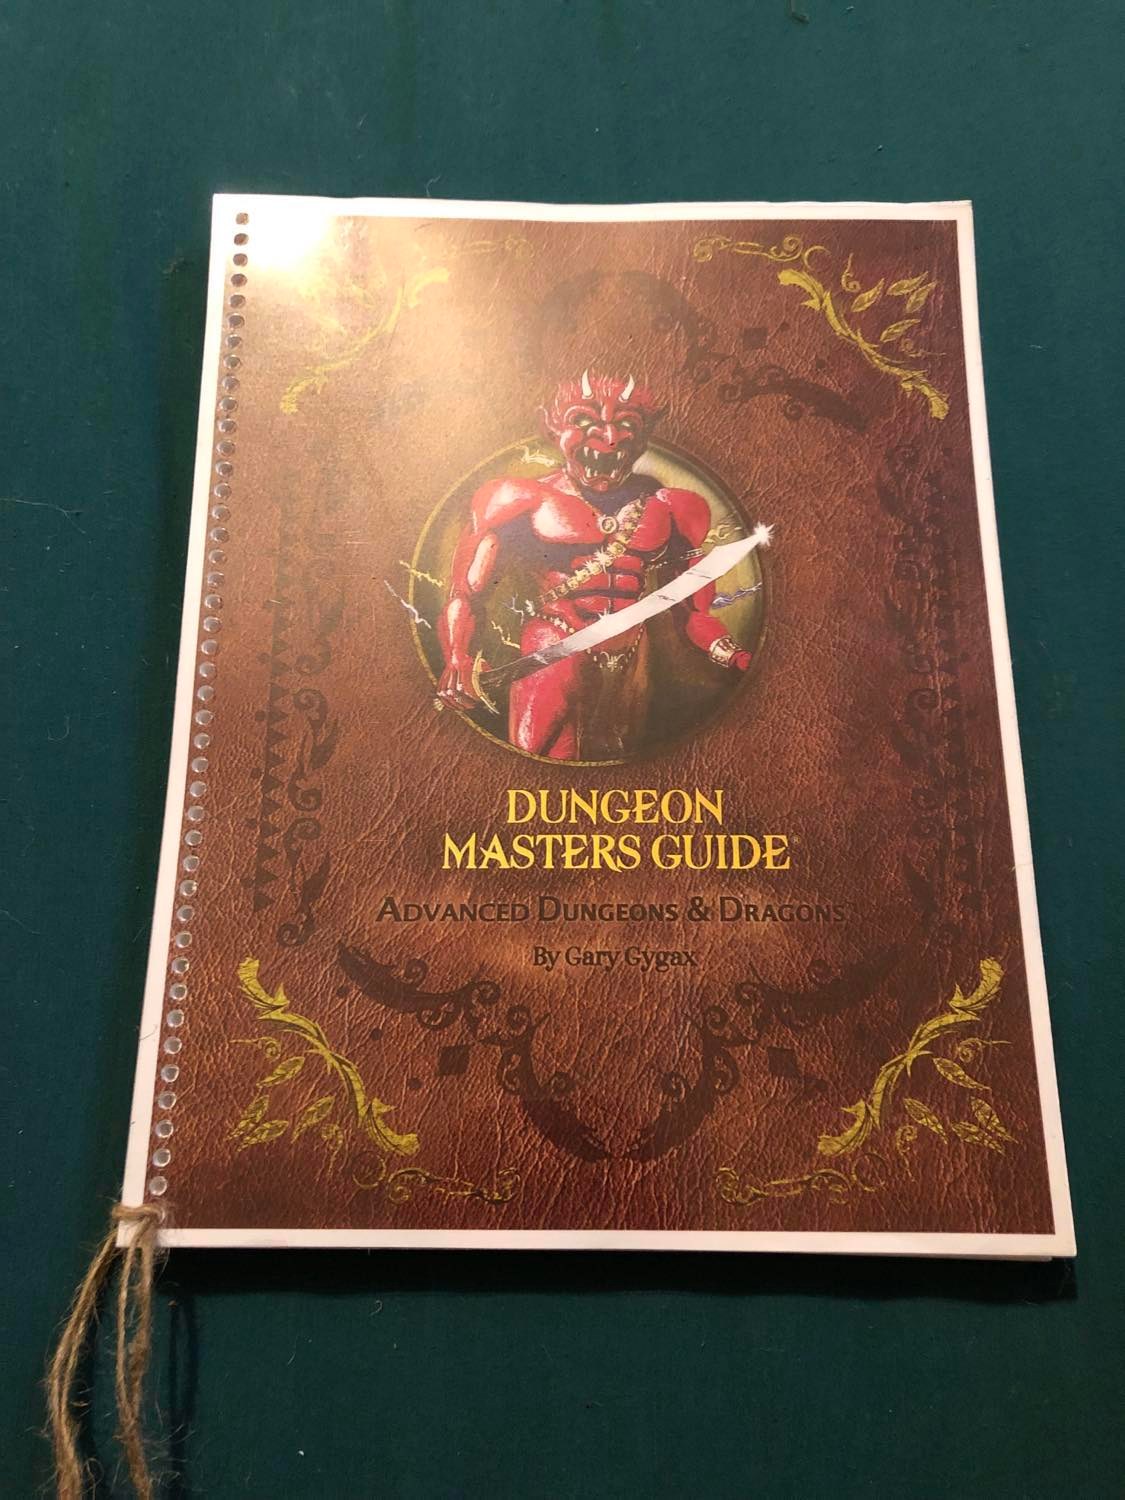 The first edition Dungeon Master's Guide, with the first strand of binding tied in